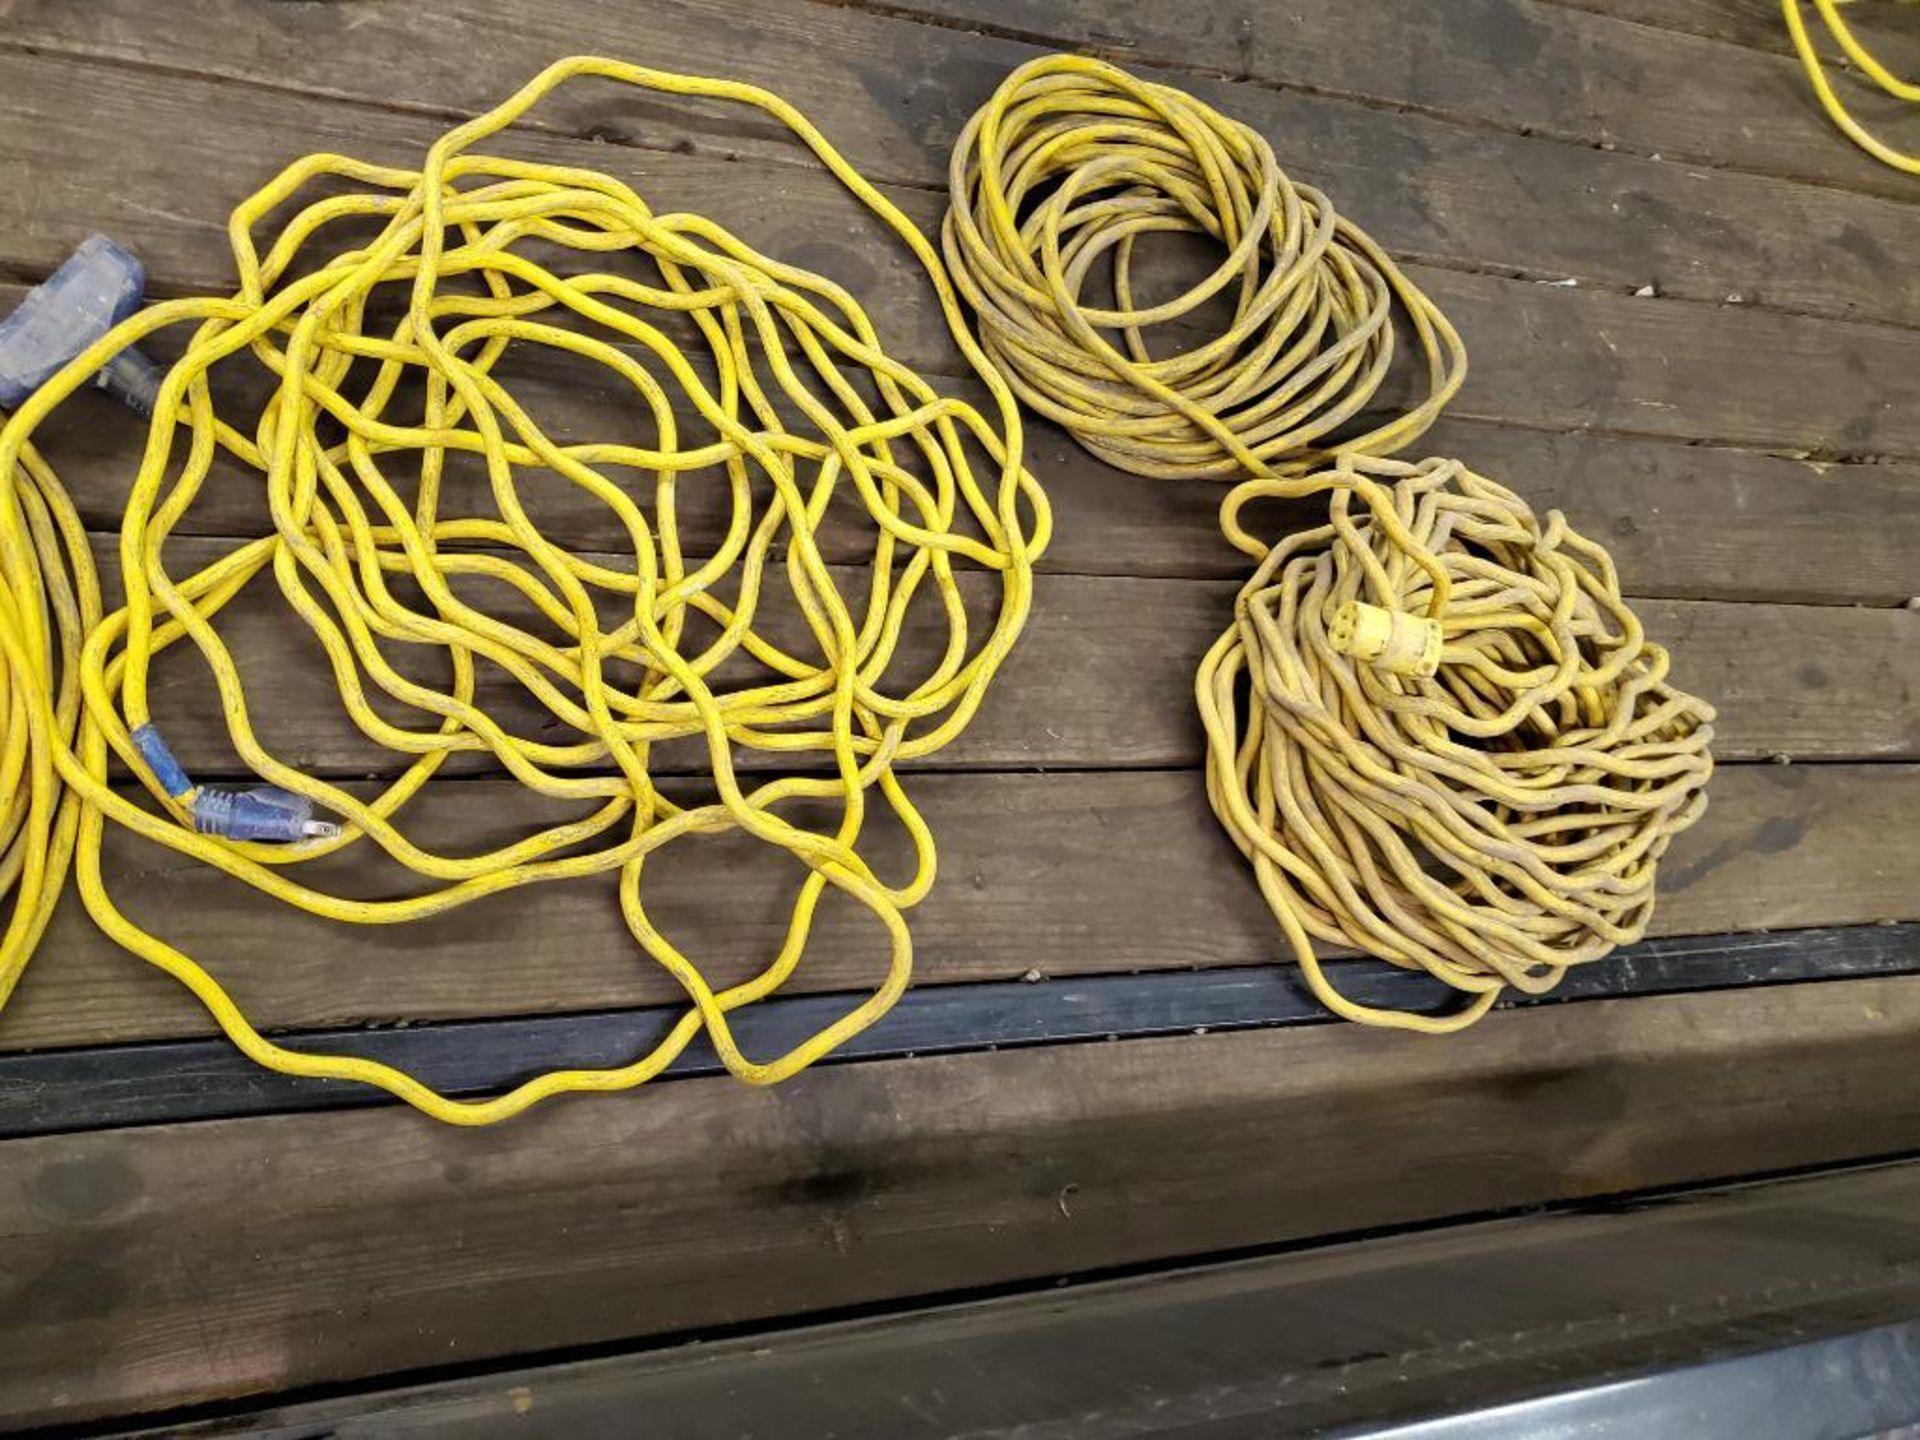 Assorted cords.